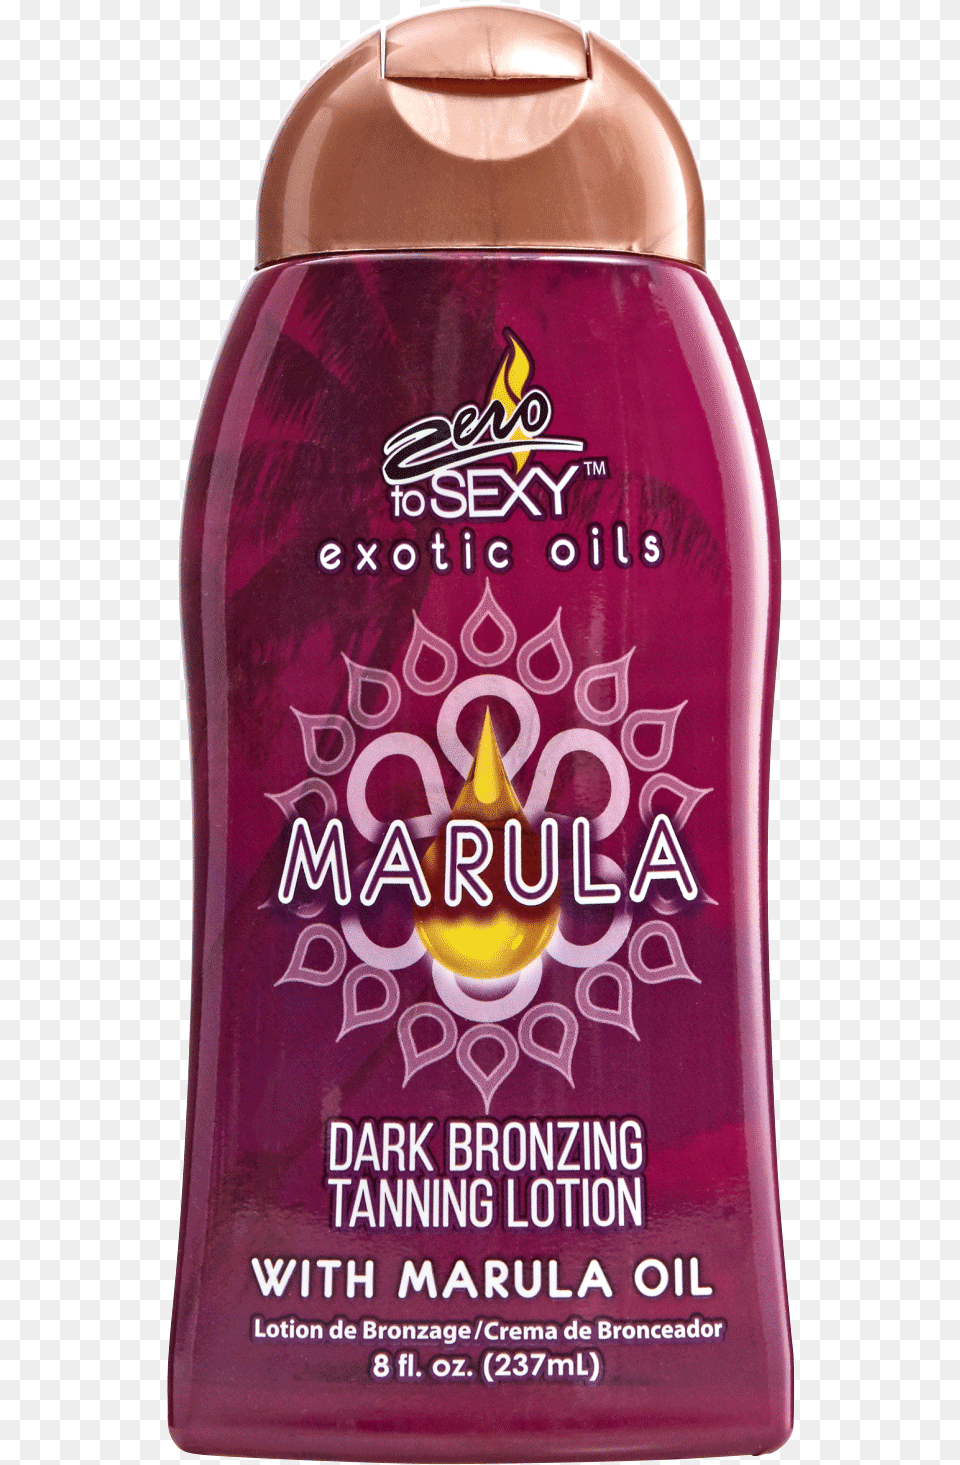 Zero To Sexy Marula Dark Bronzing Tanning Lotion, Bottle, Cosmetics, Can, Tin Png Image